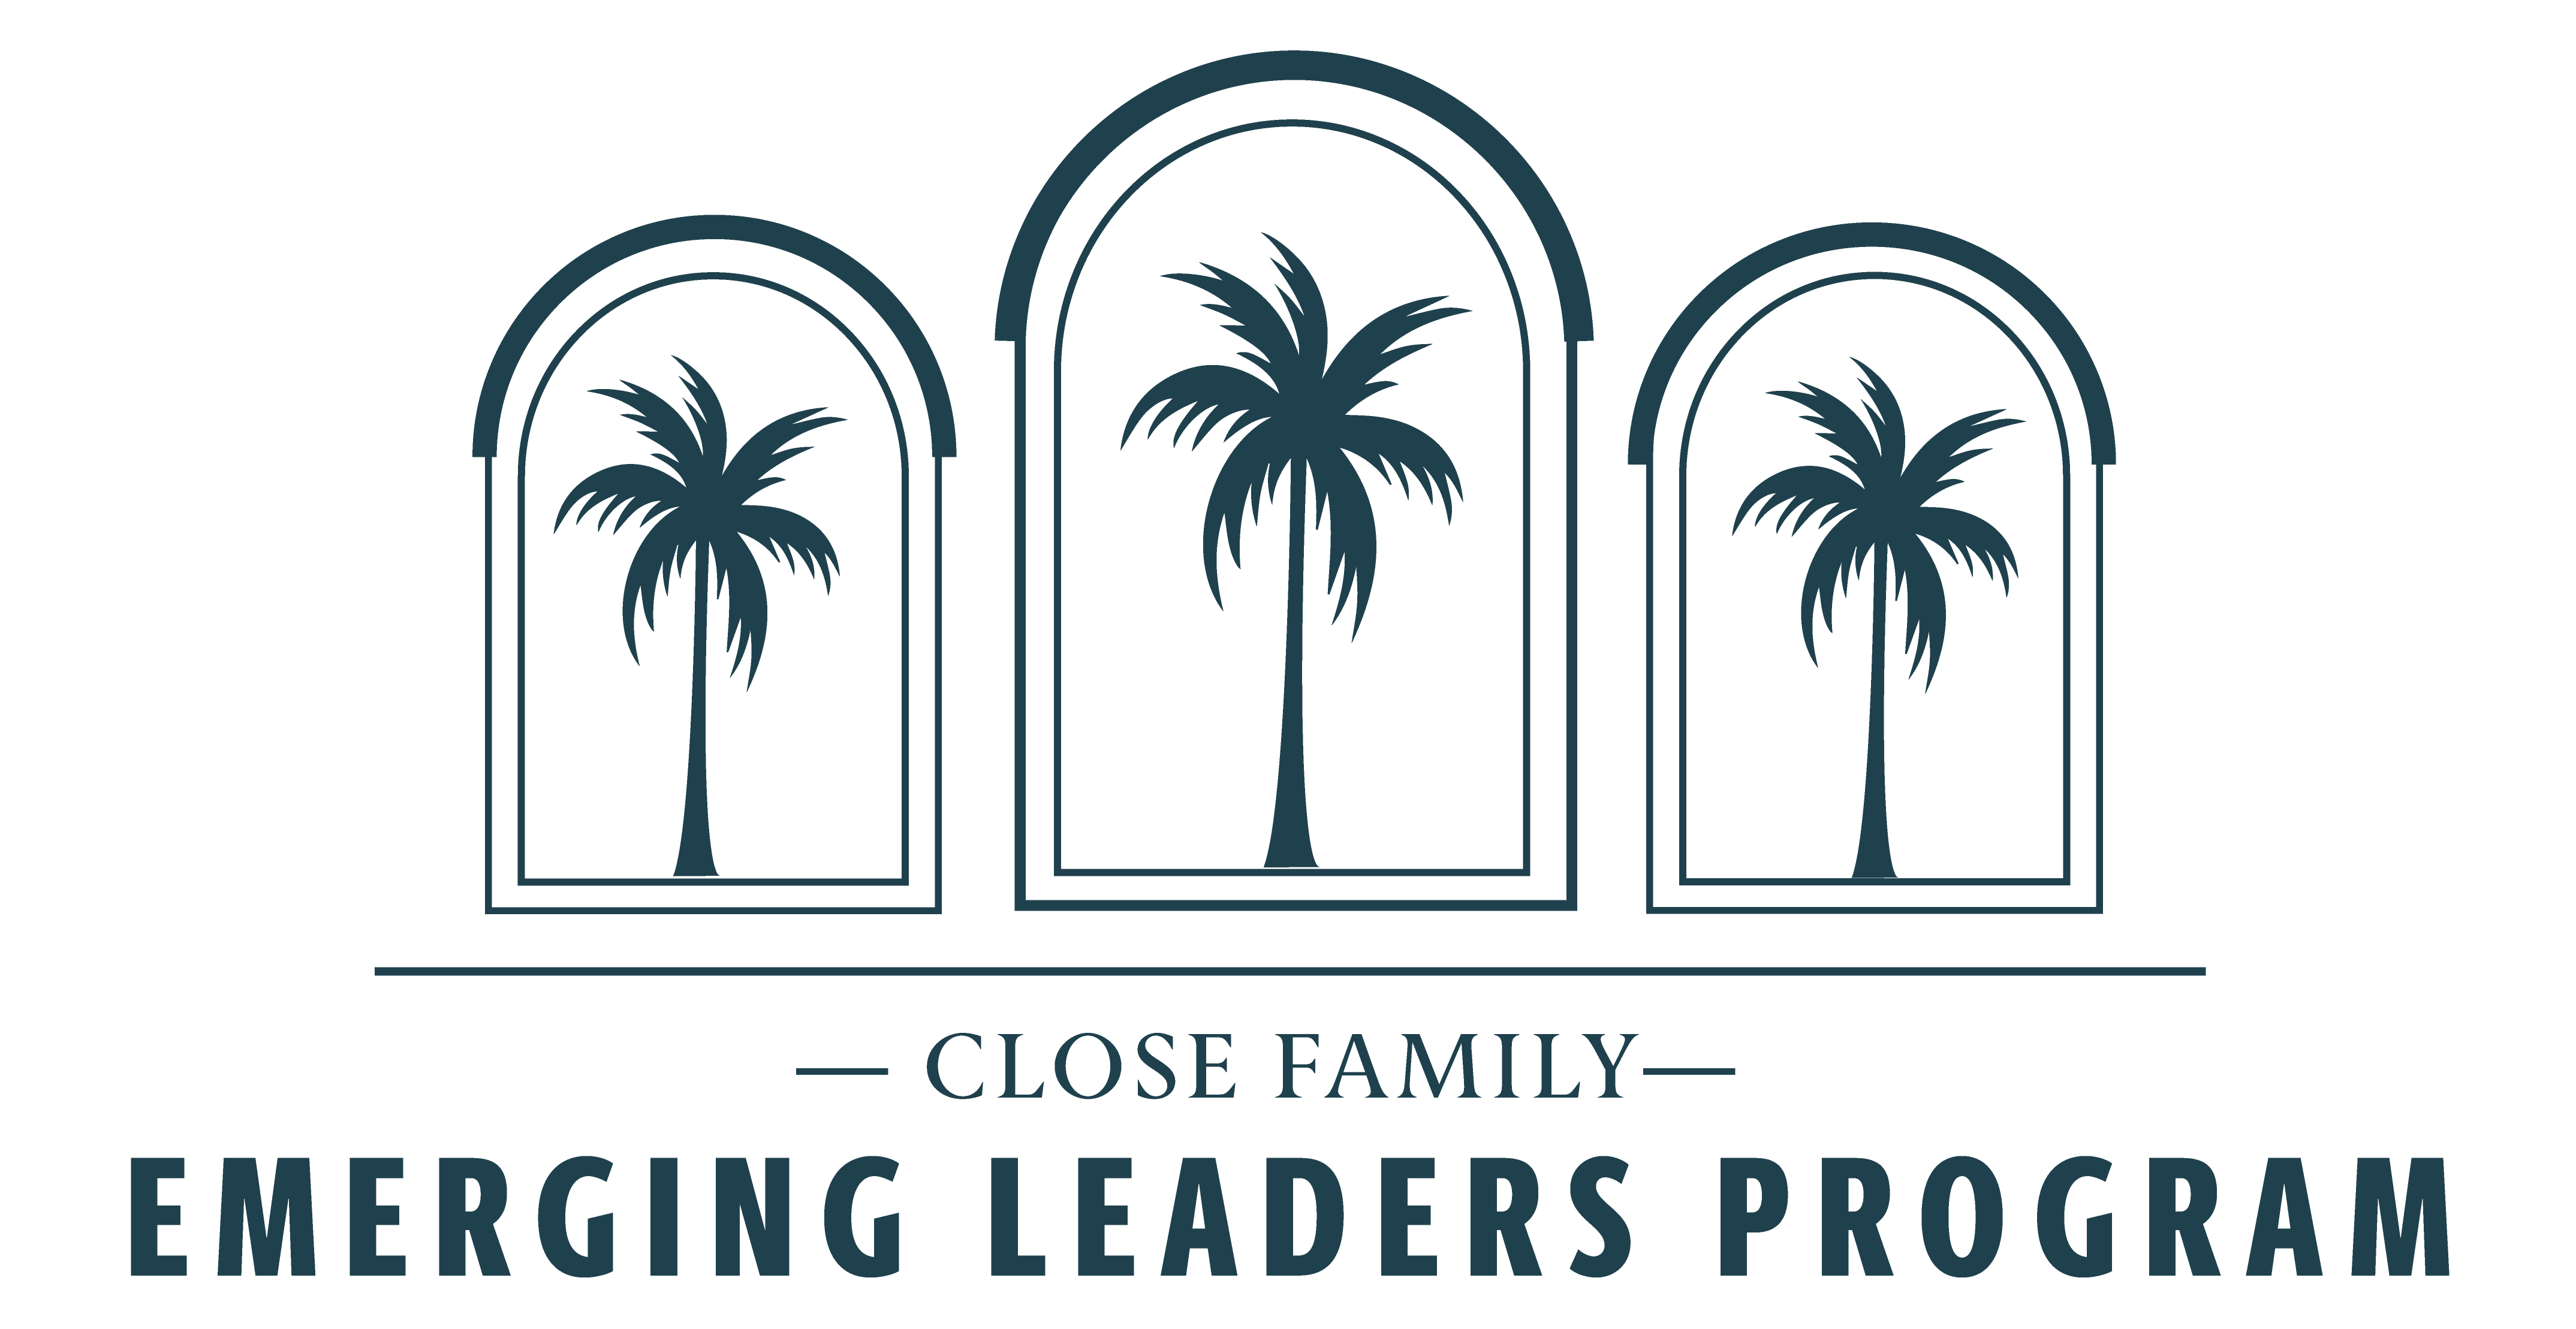 Close Family Emerging Leaders Program - Leadership and Service